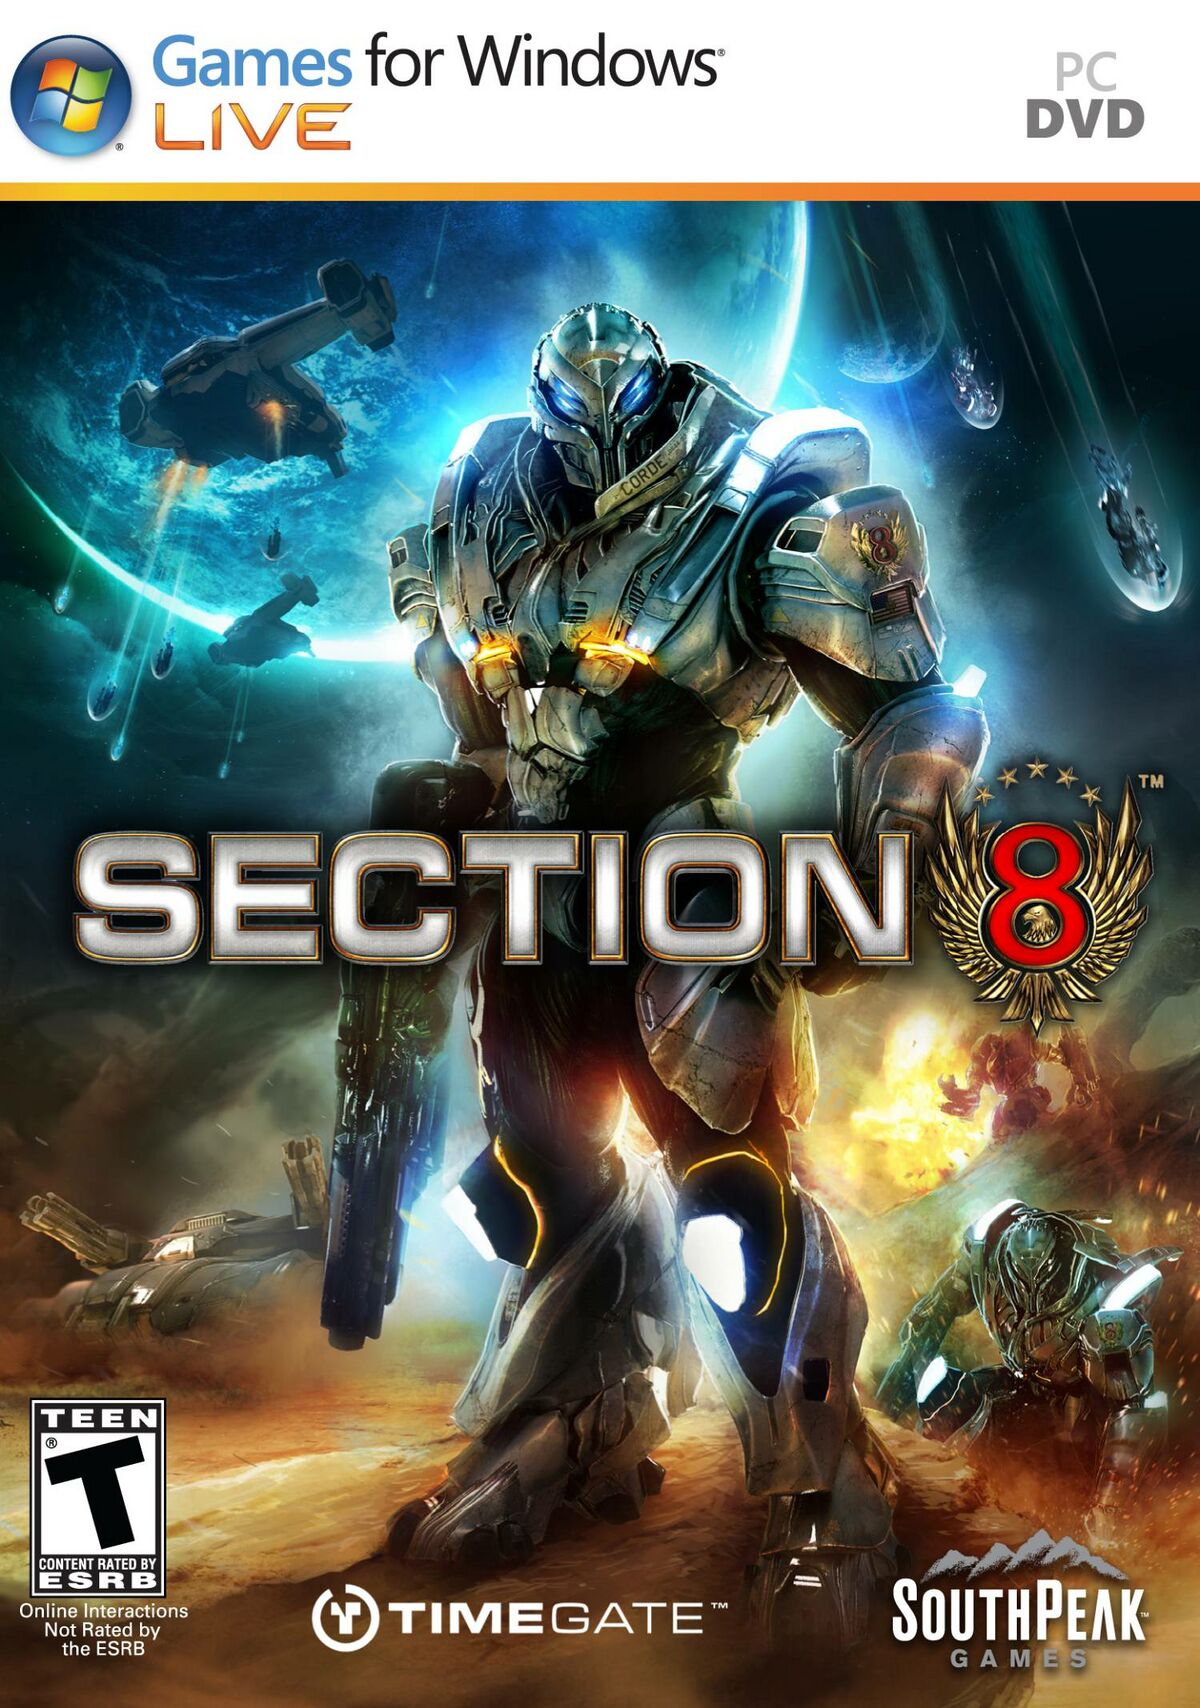 Section 8 - StrategyWiki, the video game walkthrough and ...